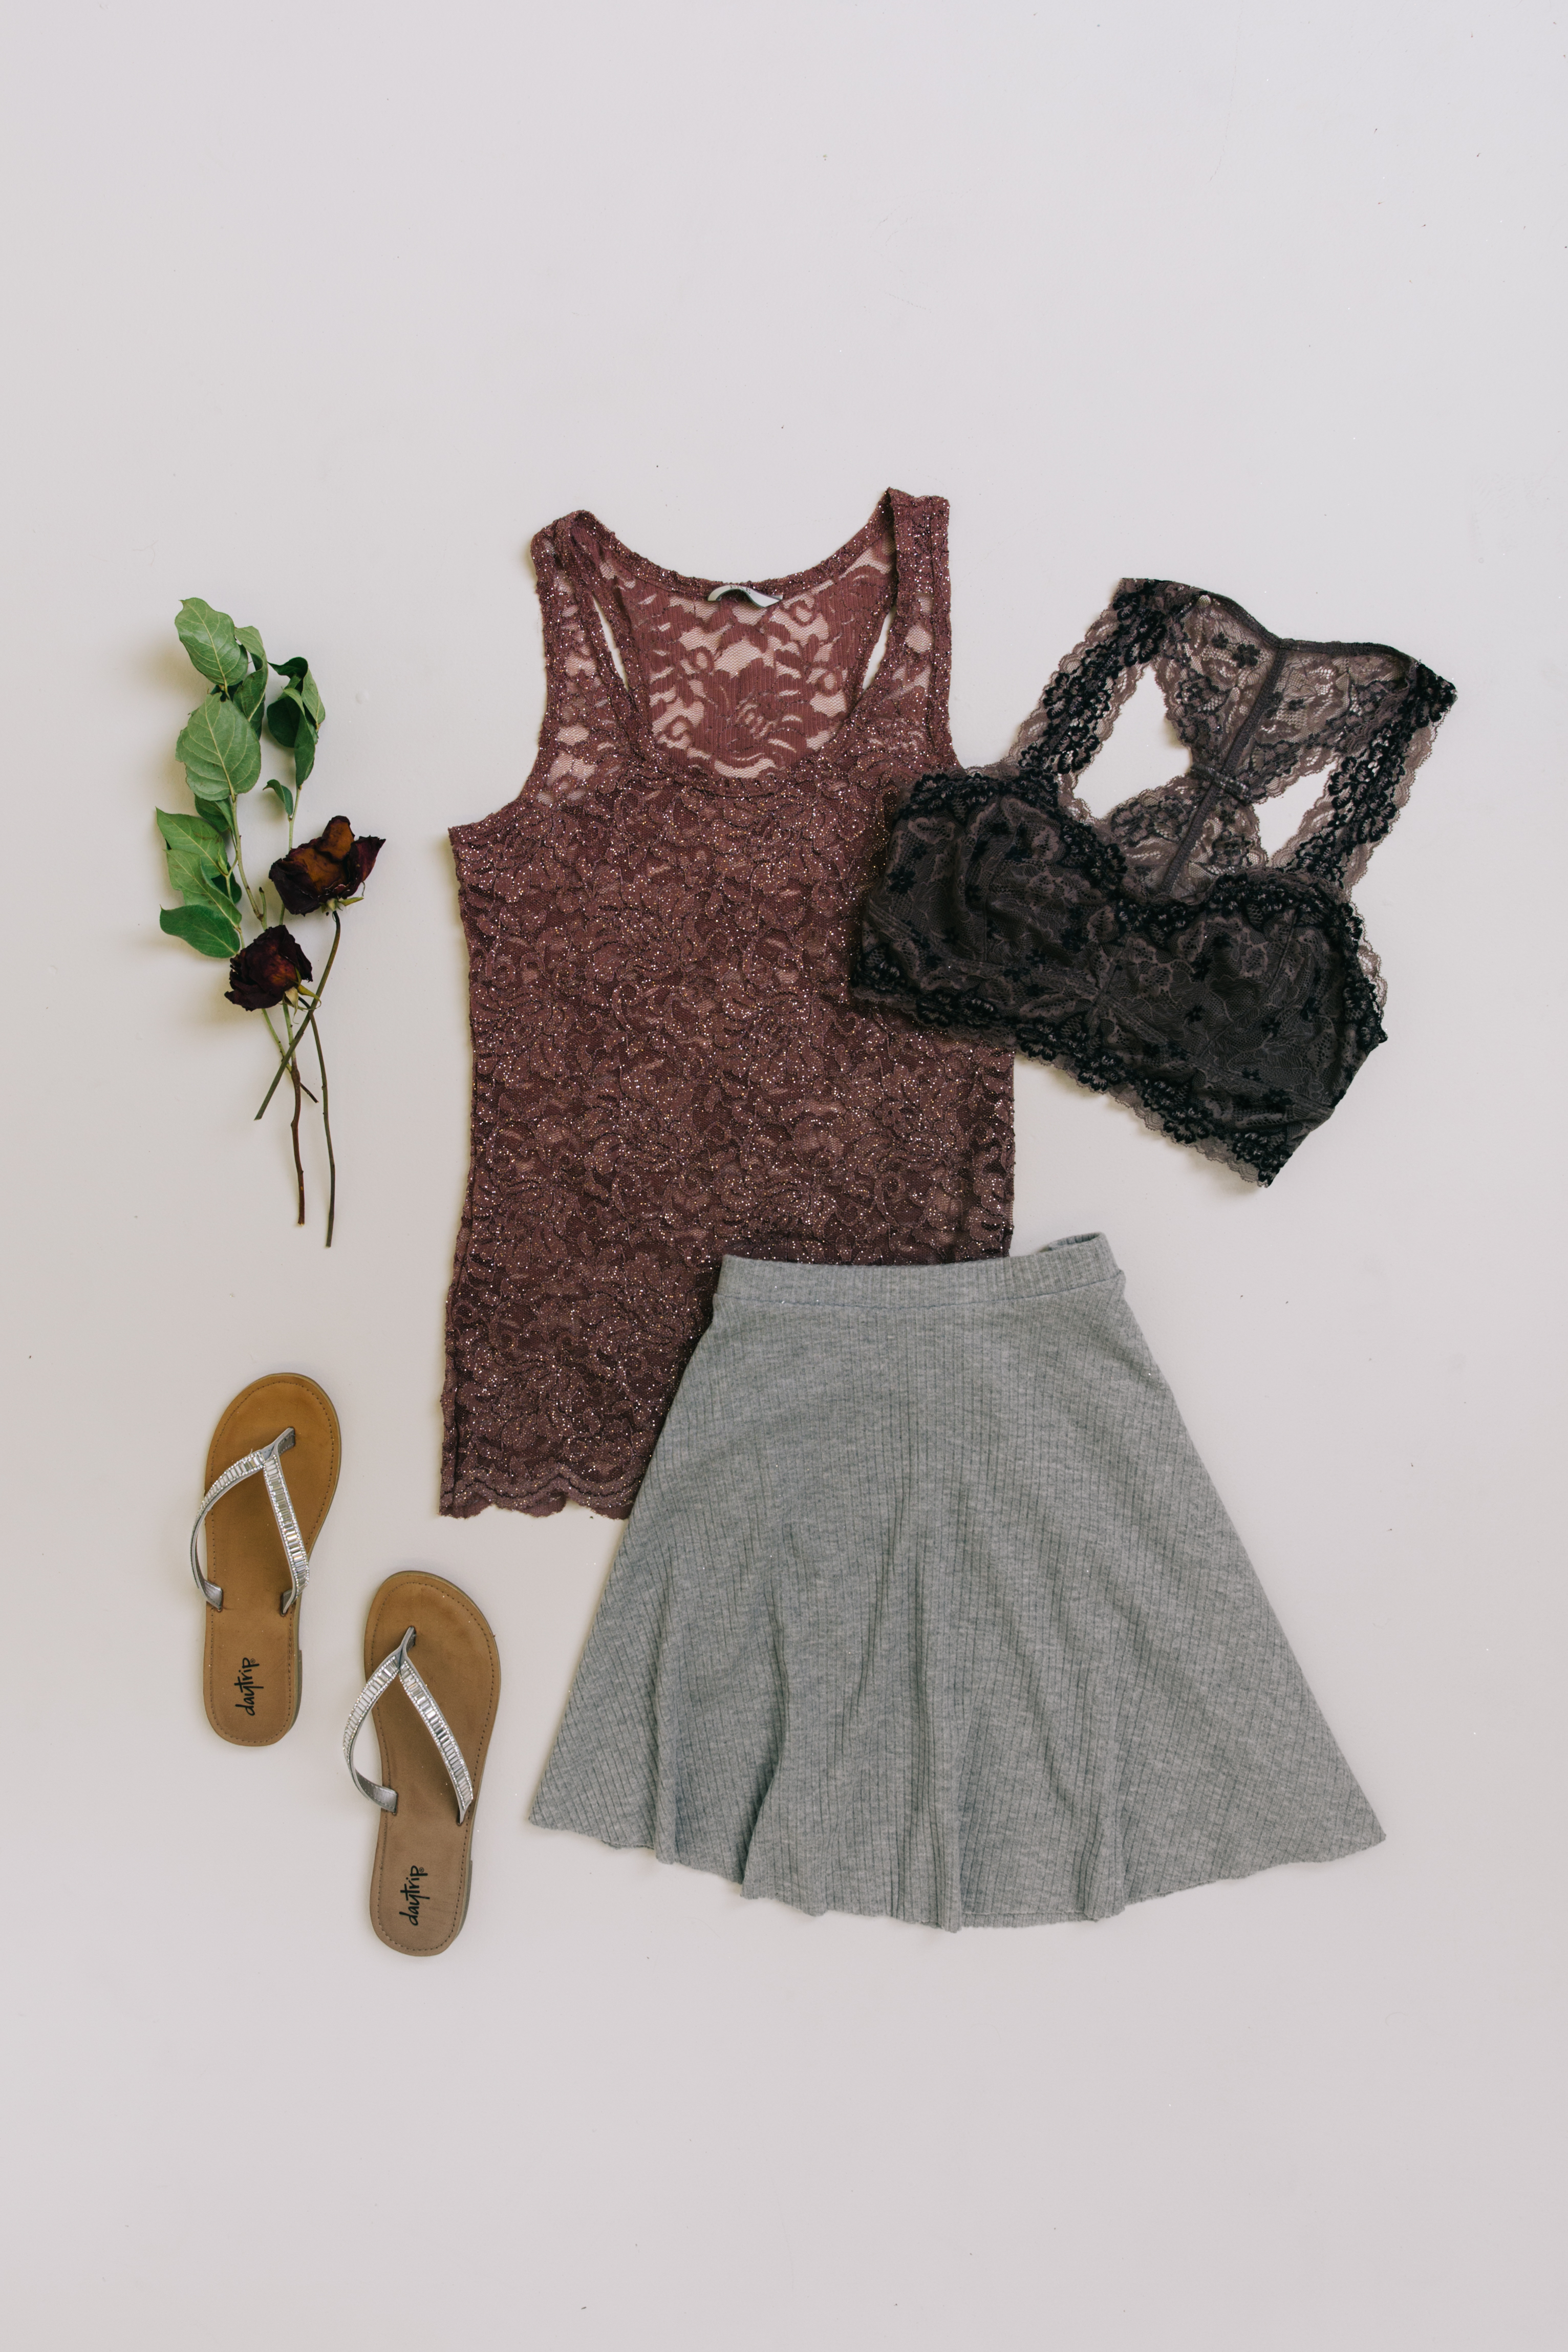 Laydown of a grey skater skirt, mauve lace tank top, and black bralette.